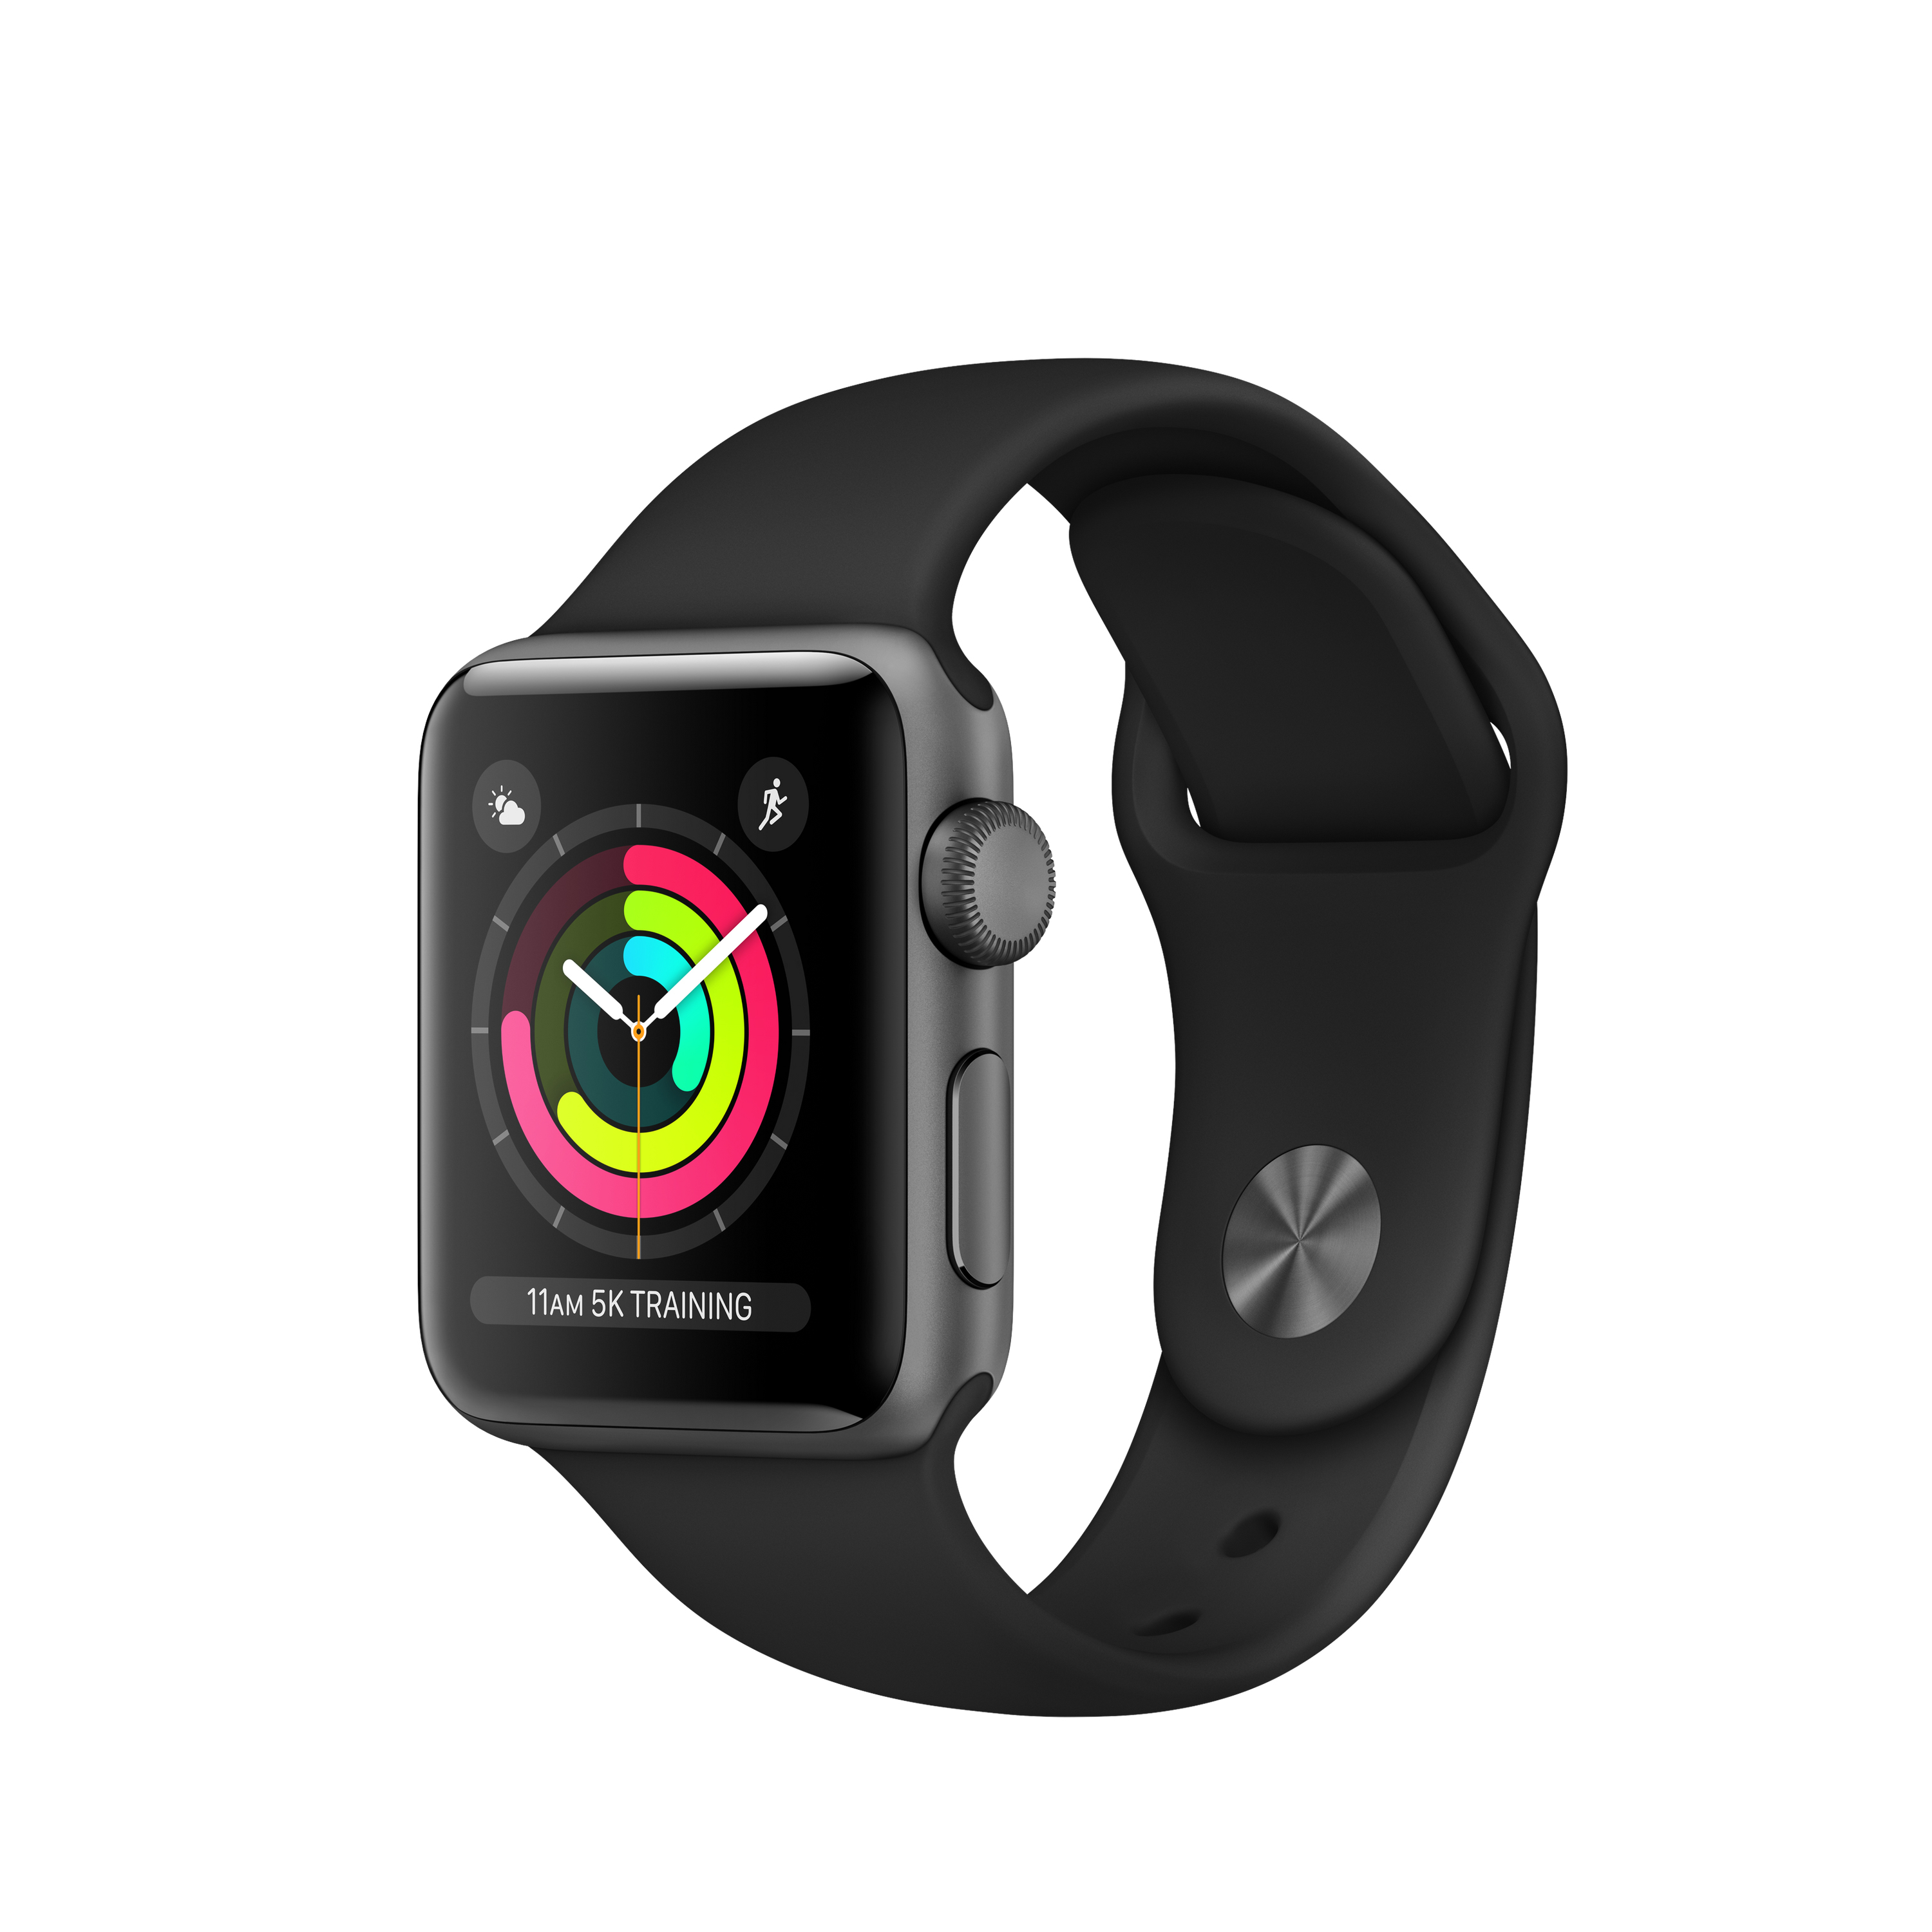 Apple Watch Series 3, 38mm, GPS - Space Grey Aluminium with Black Sport Band